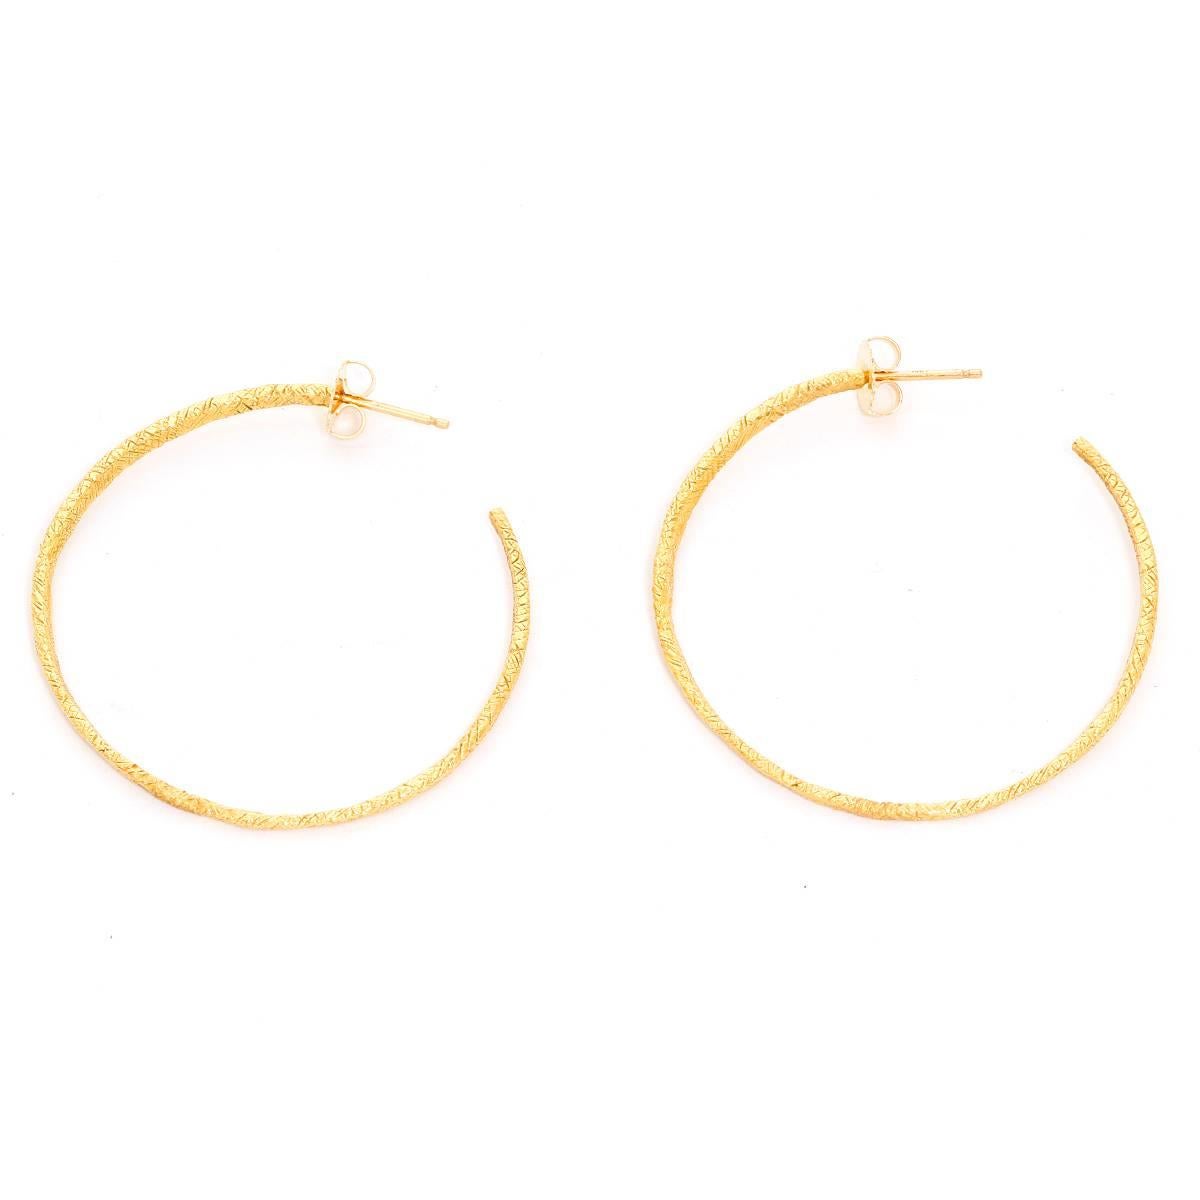 18 Karat Yellow Gold Hammered Earring Hoops In Excellent Condition For Sale In Dallas, TX